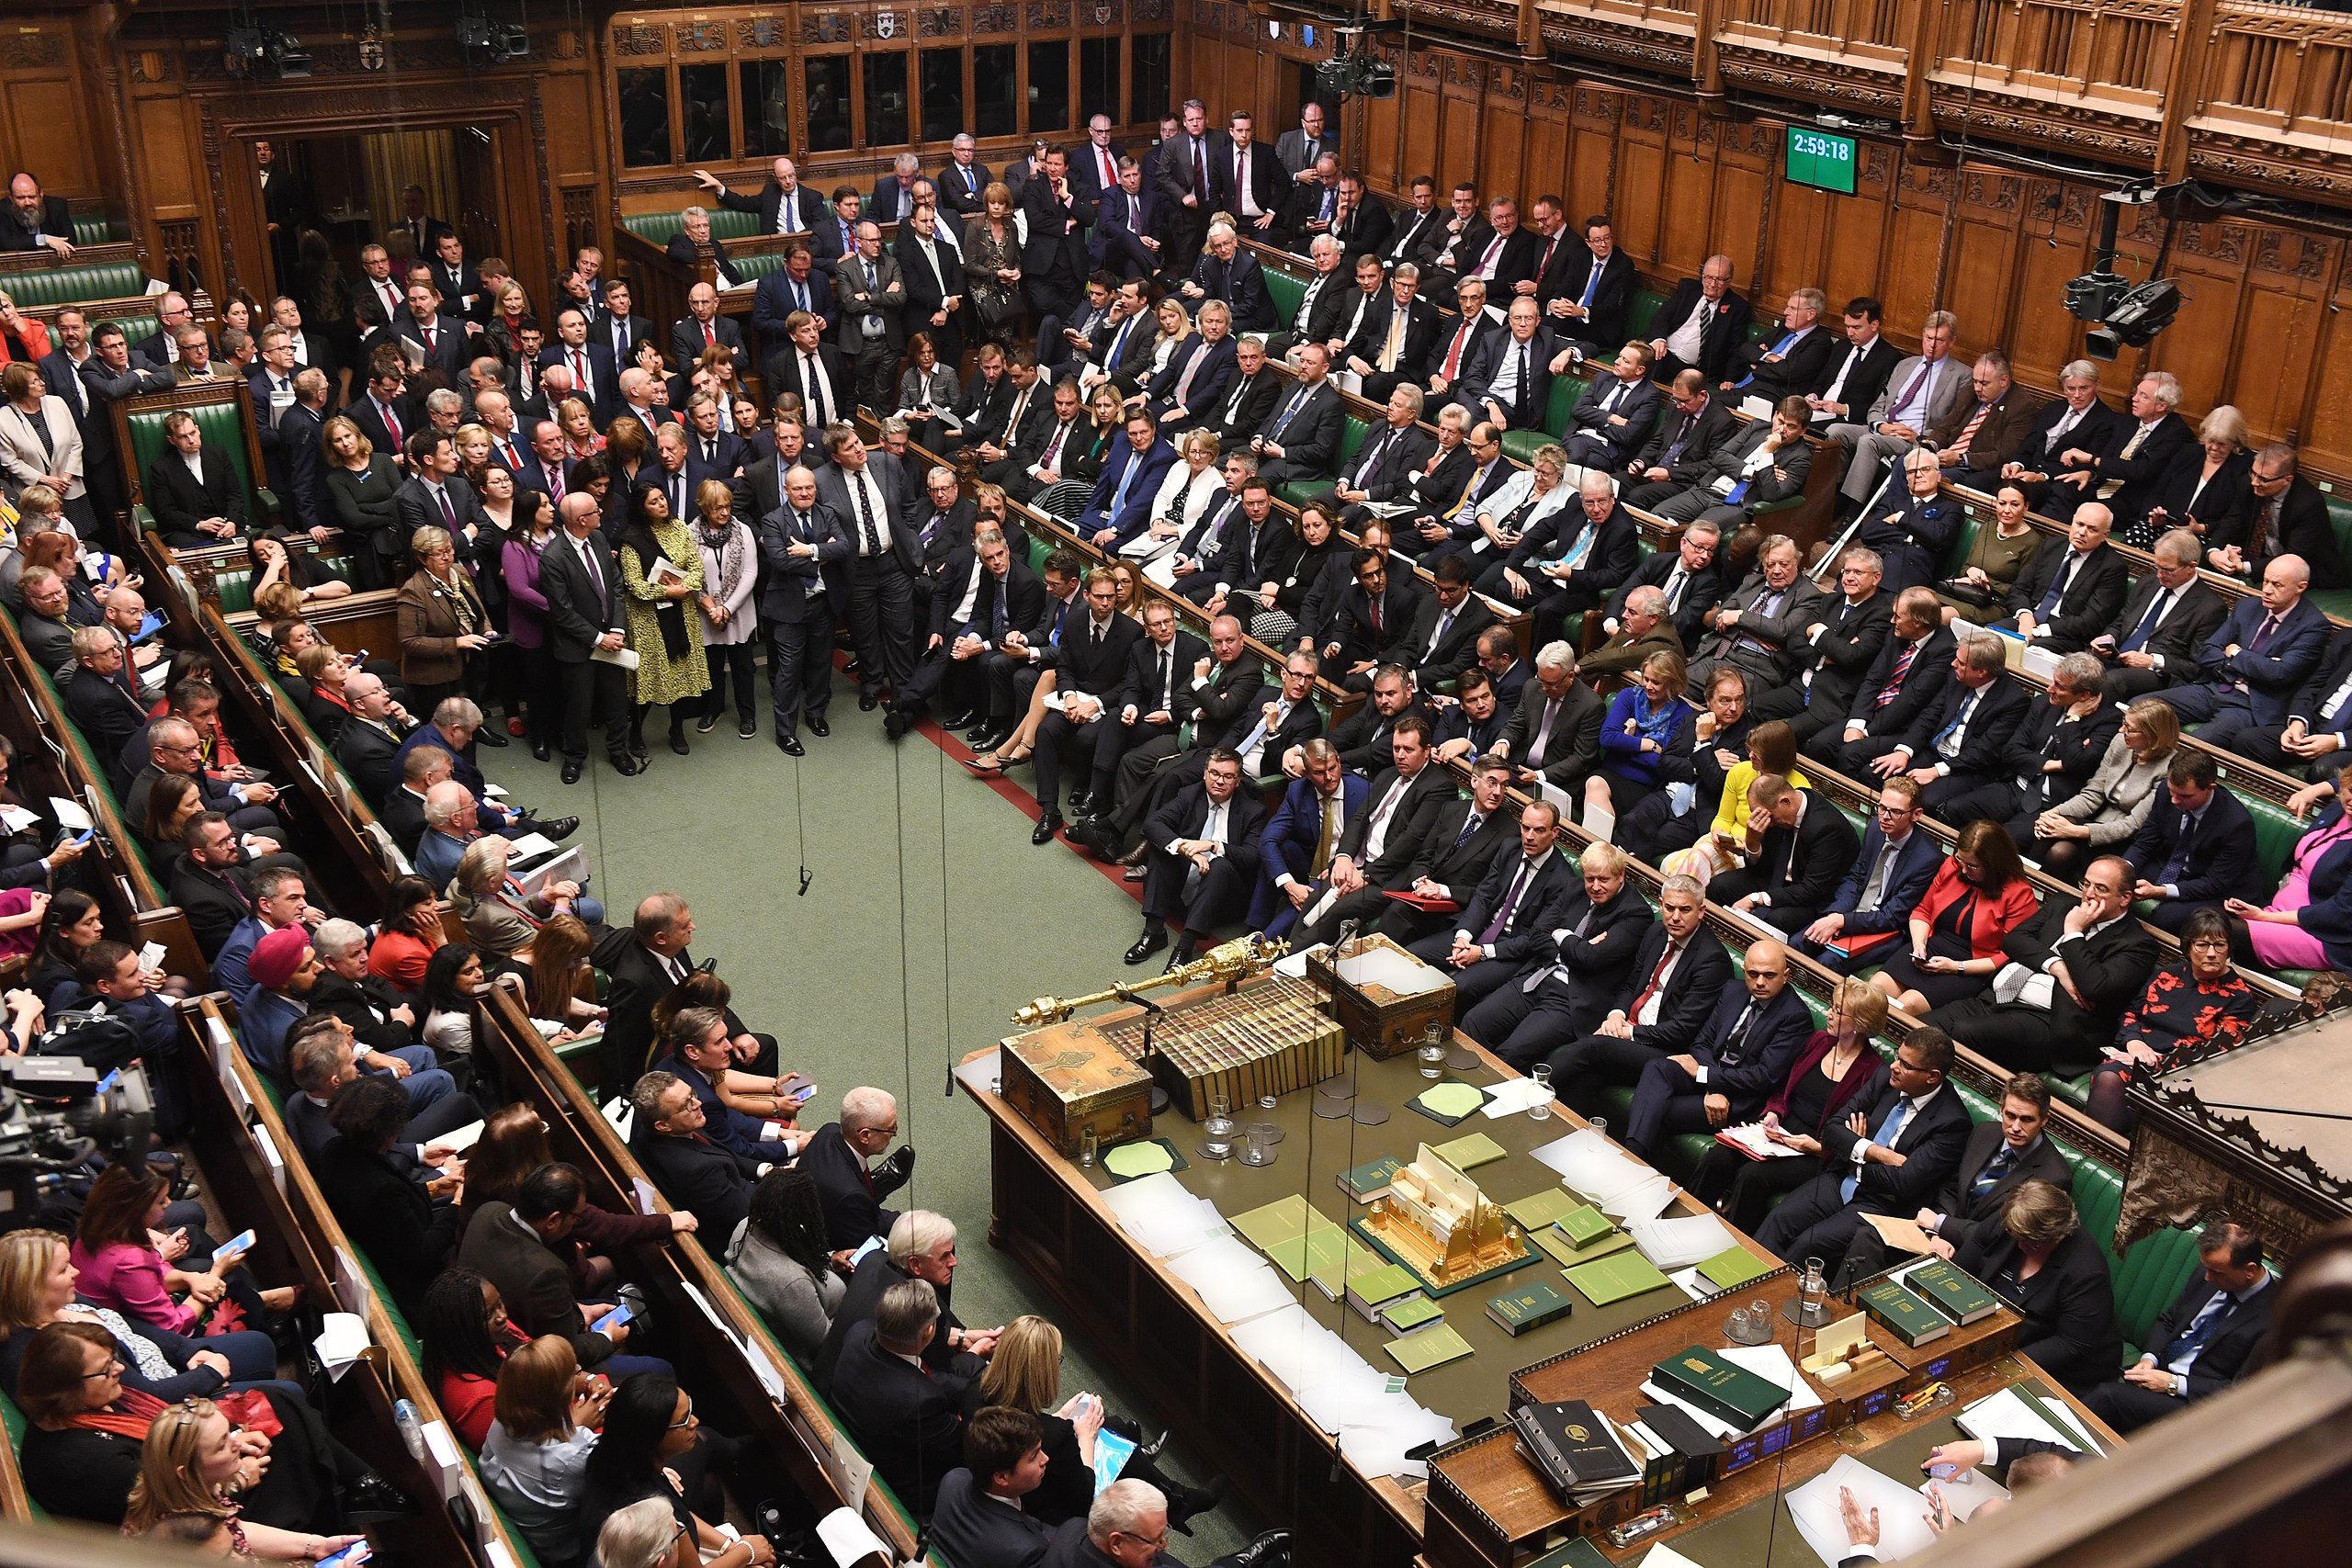 A photo showing a packed chamber in the House of Commons. This was for a debate on Brexit in 2019. Which includes many of the candidates in the tory leadership race.